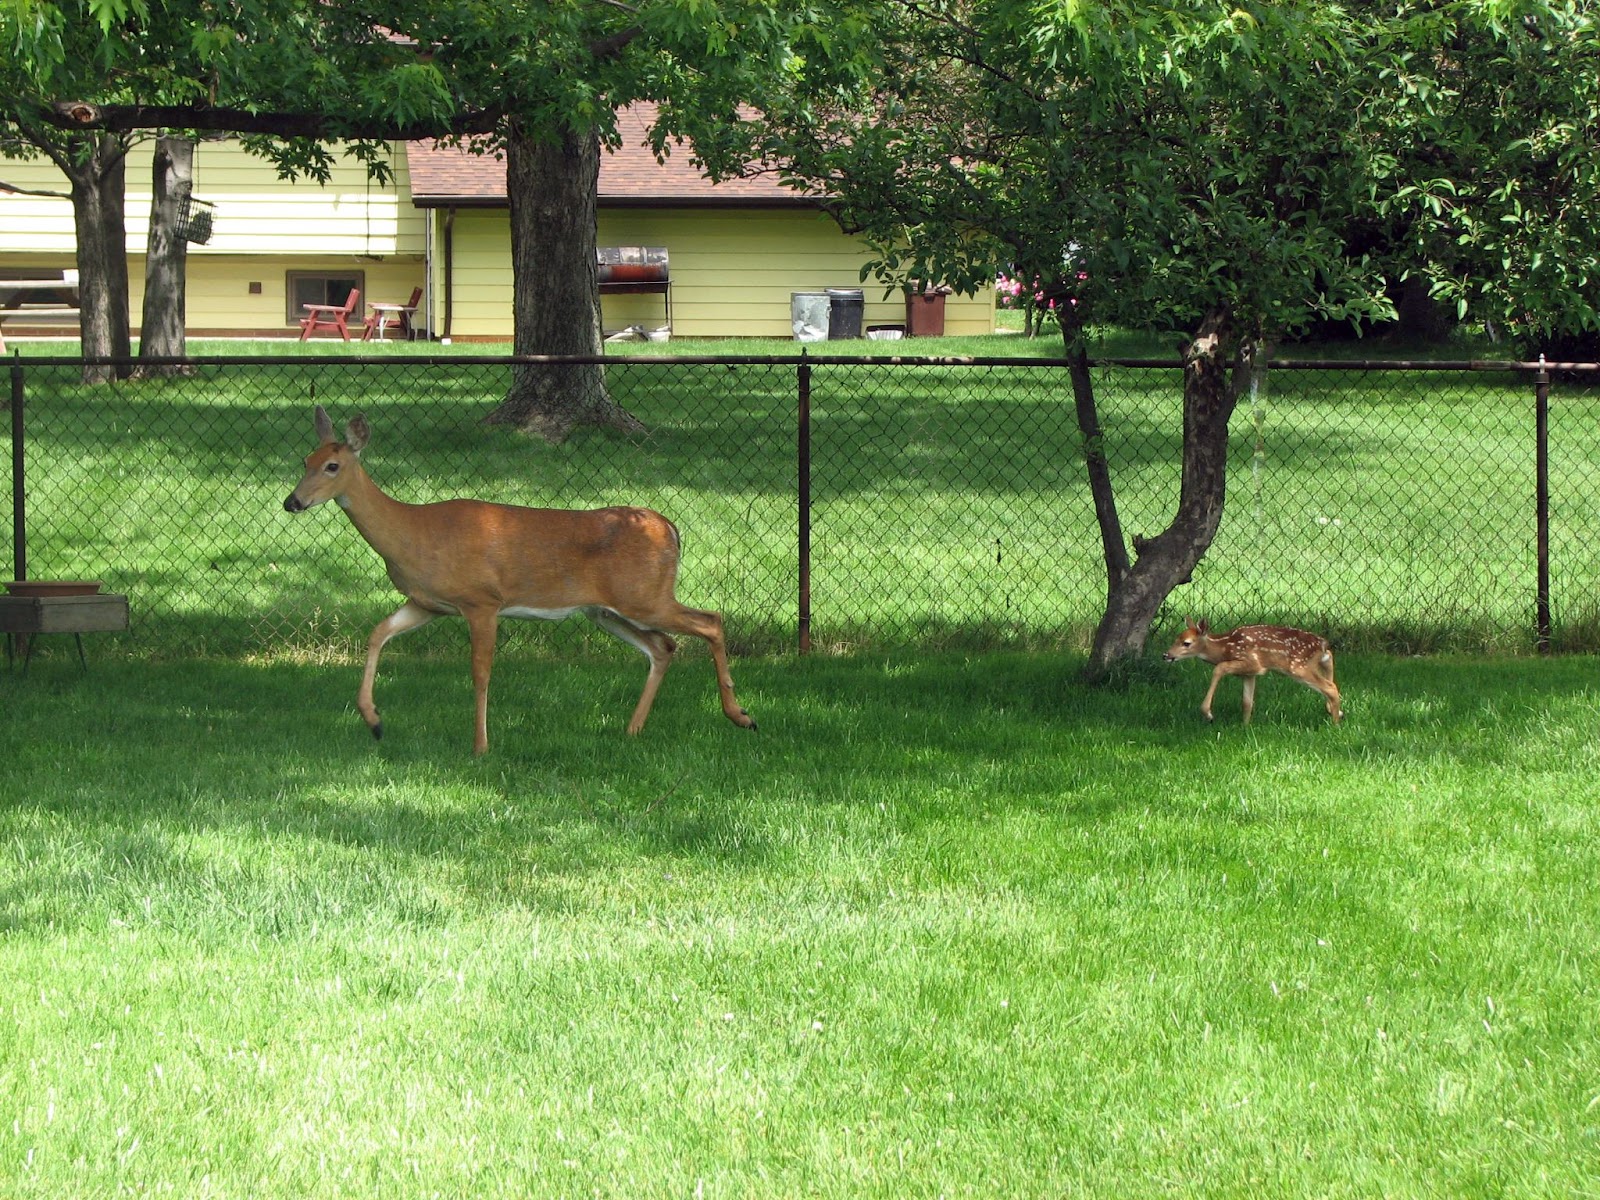 A deer and a faun walking along a fence close to house.